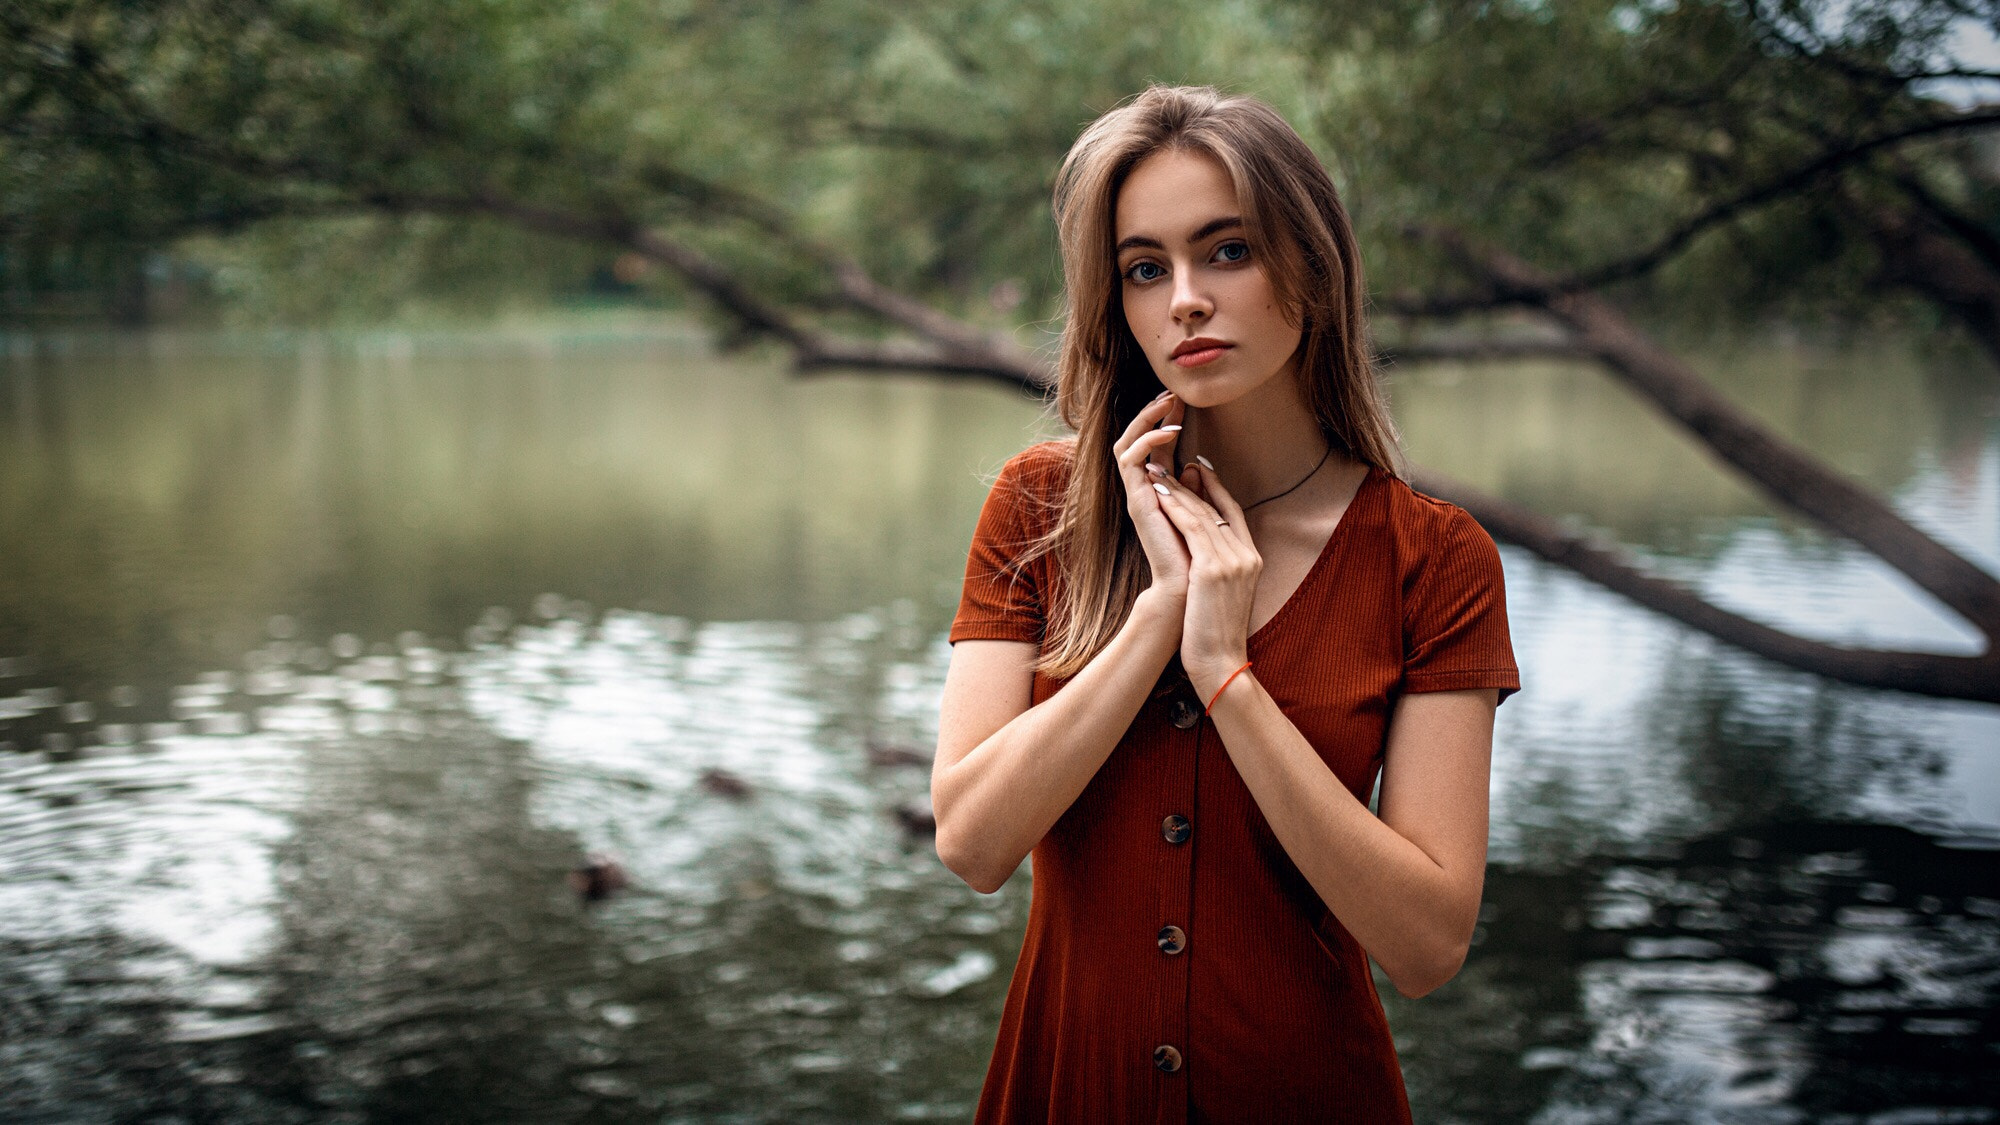 Women Model Looking At Viewer Portrait Outdoors Dress Blue Eyes Necklace Trees River Water Depth Of  2000x1125